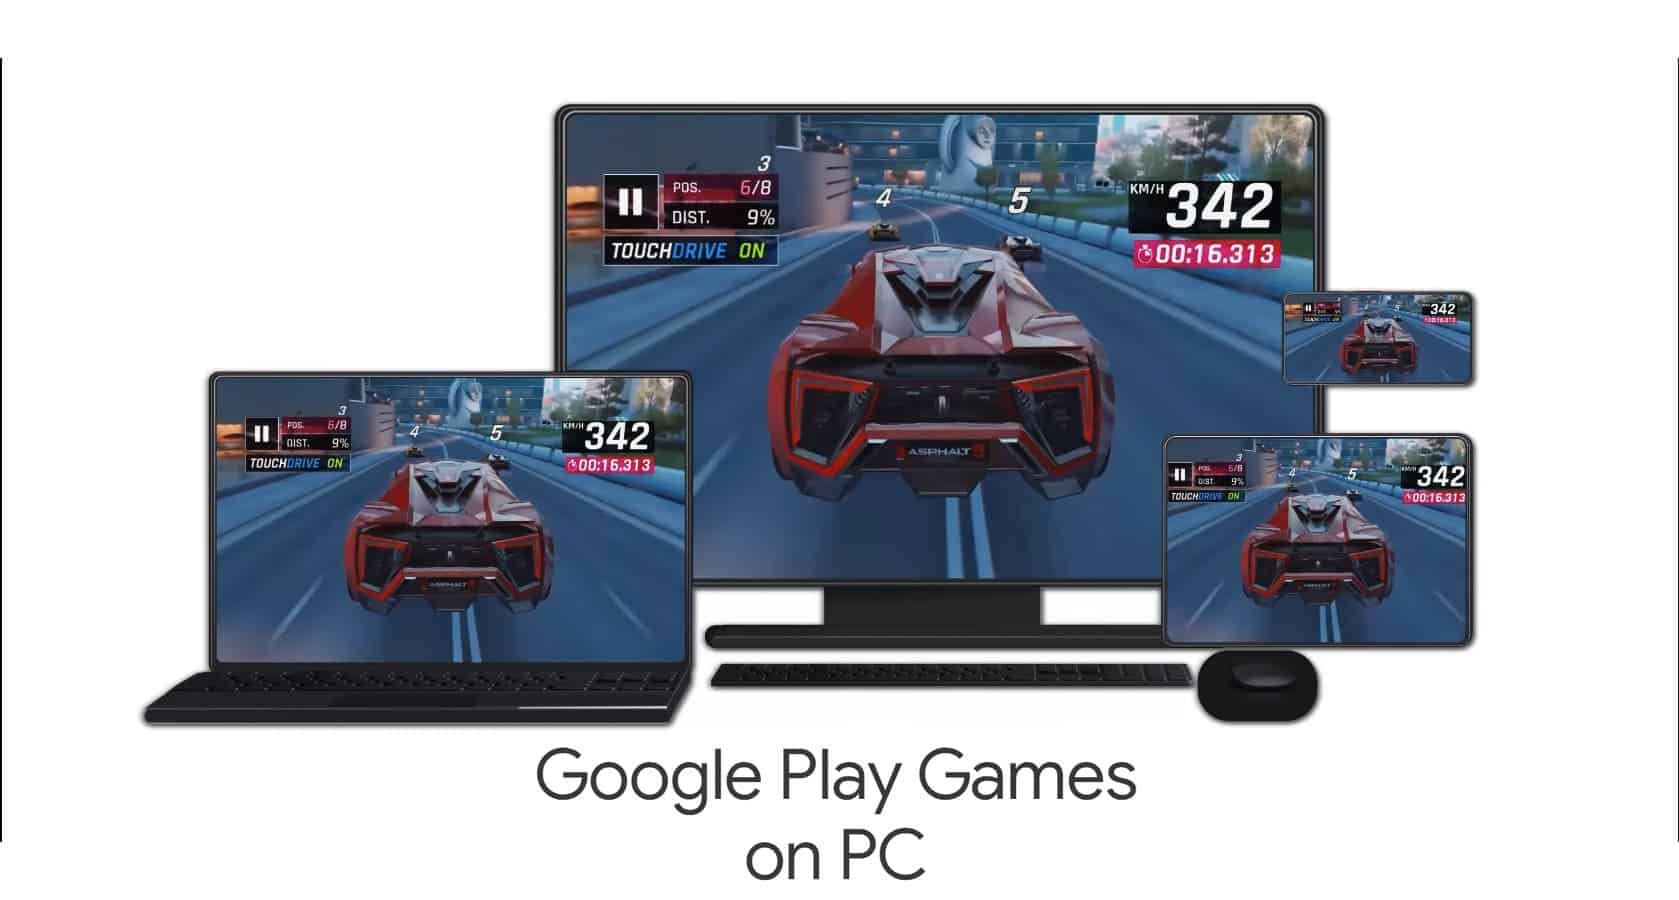 Google Play Games on PC, Android game development